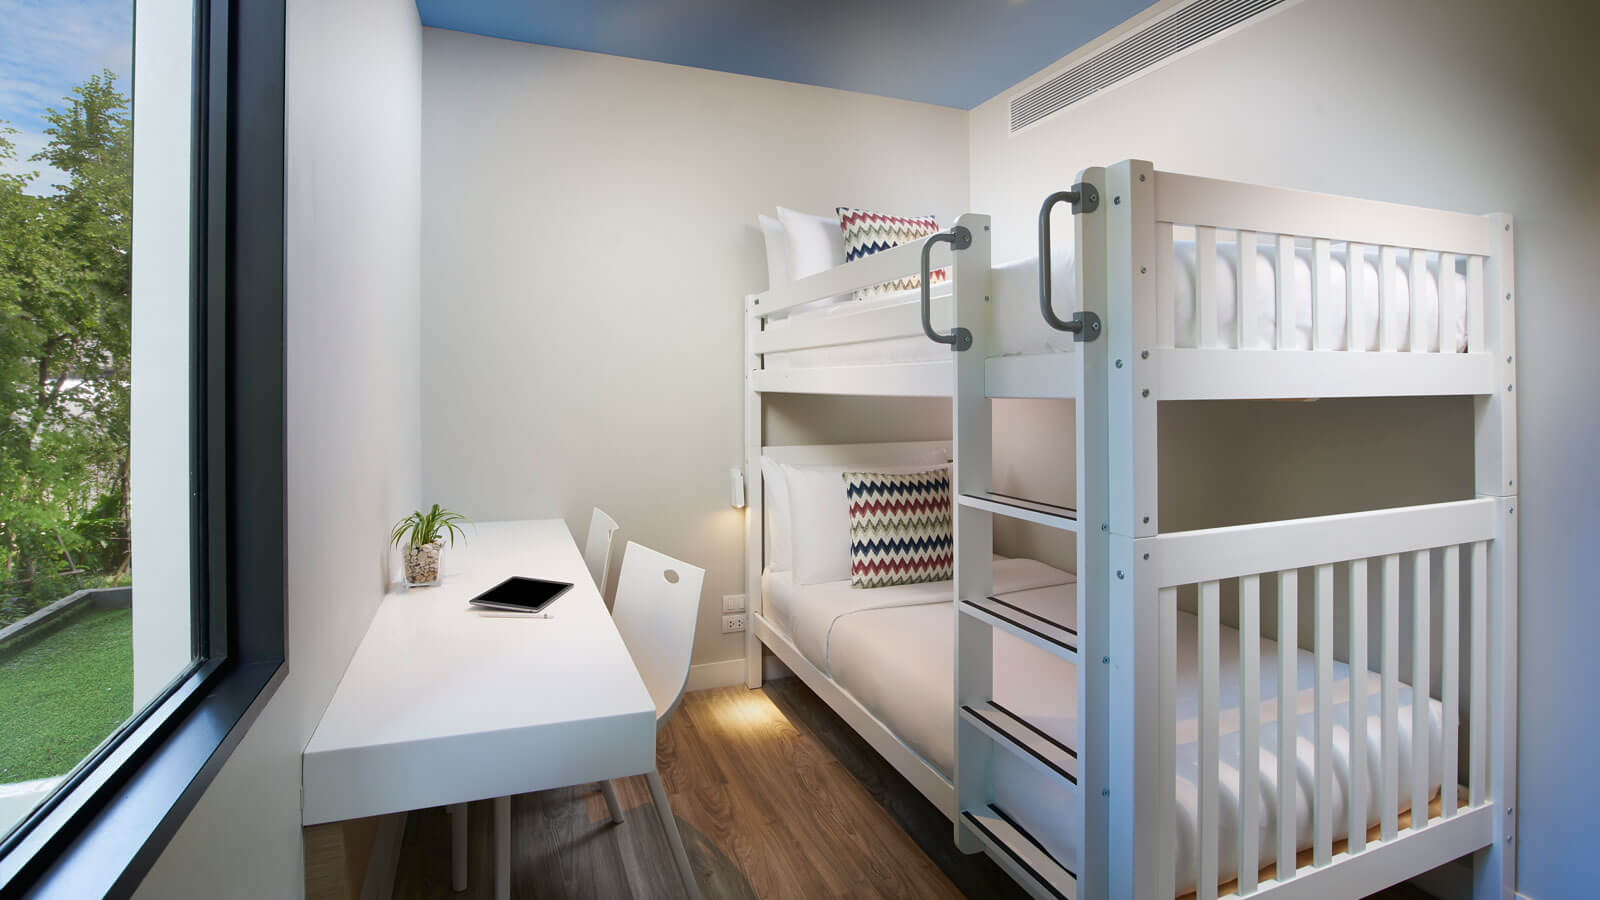 Deluxe Family - Bunk Bed - (OZO Phuket) أوزو فوكيت